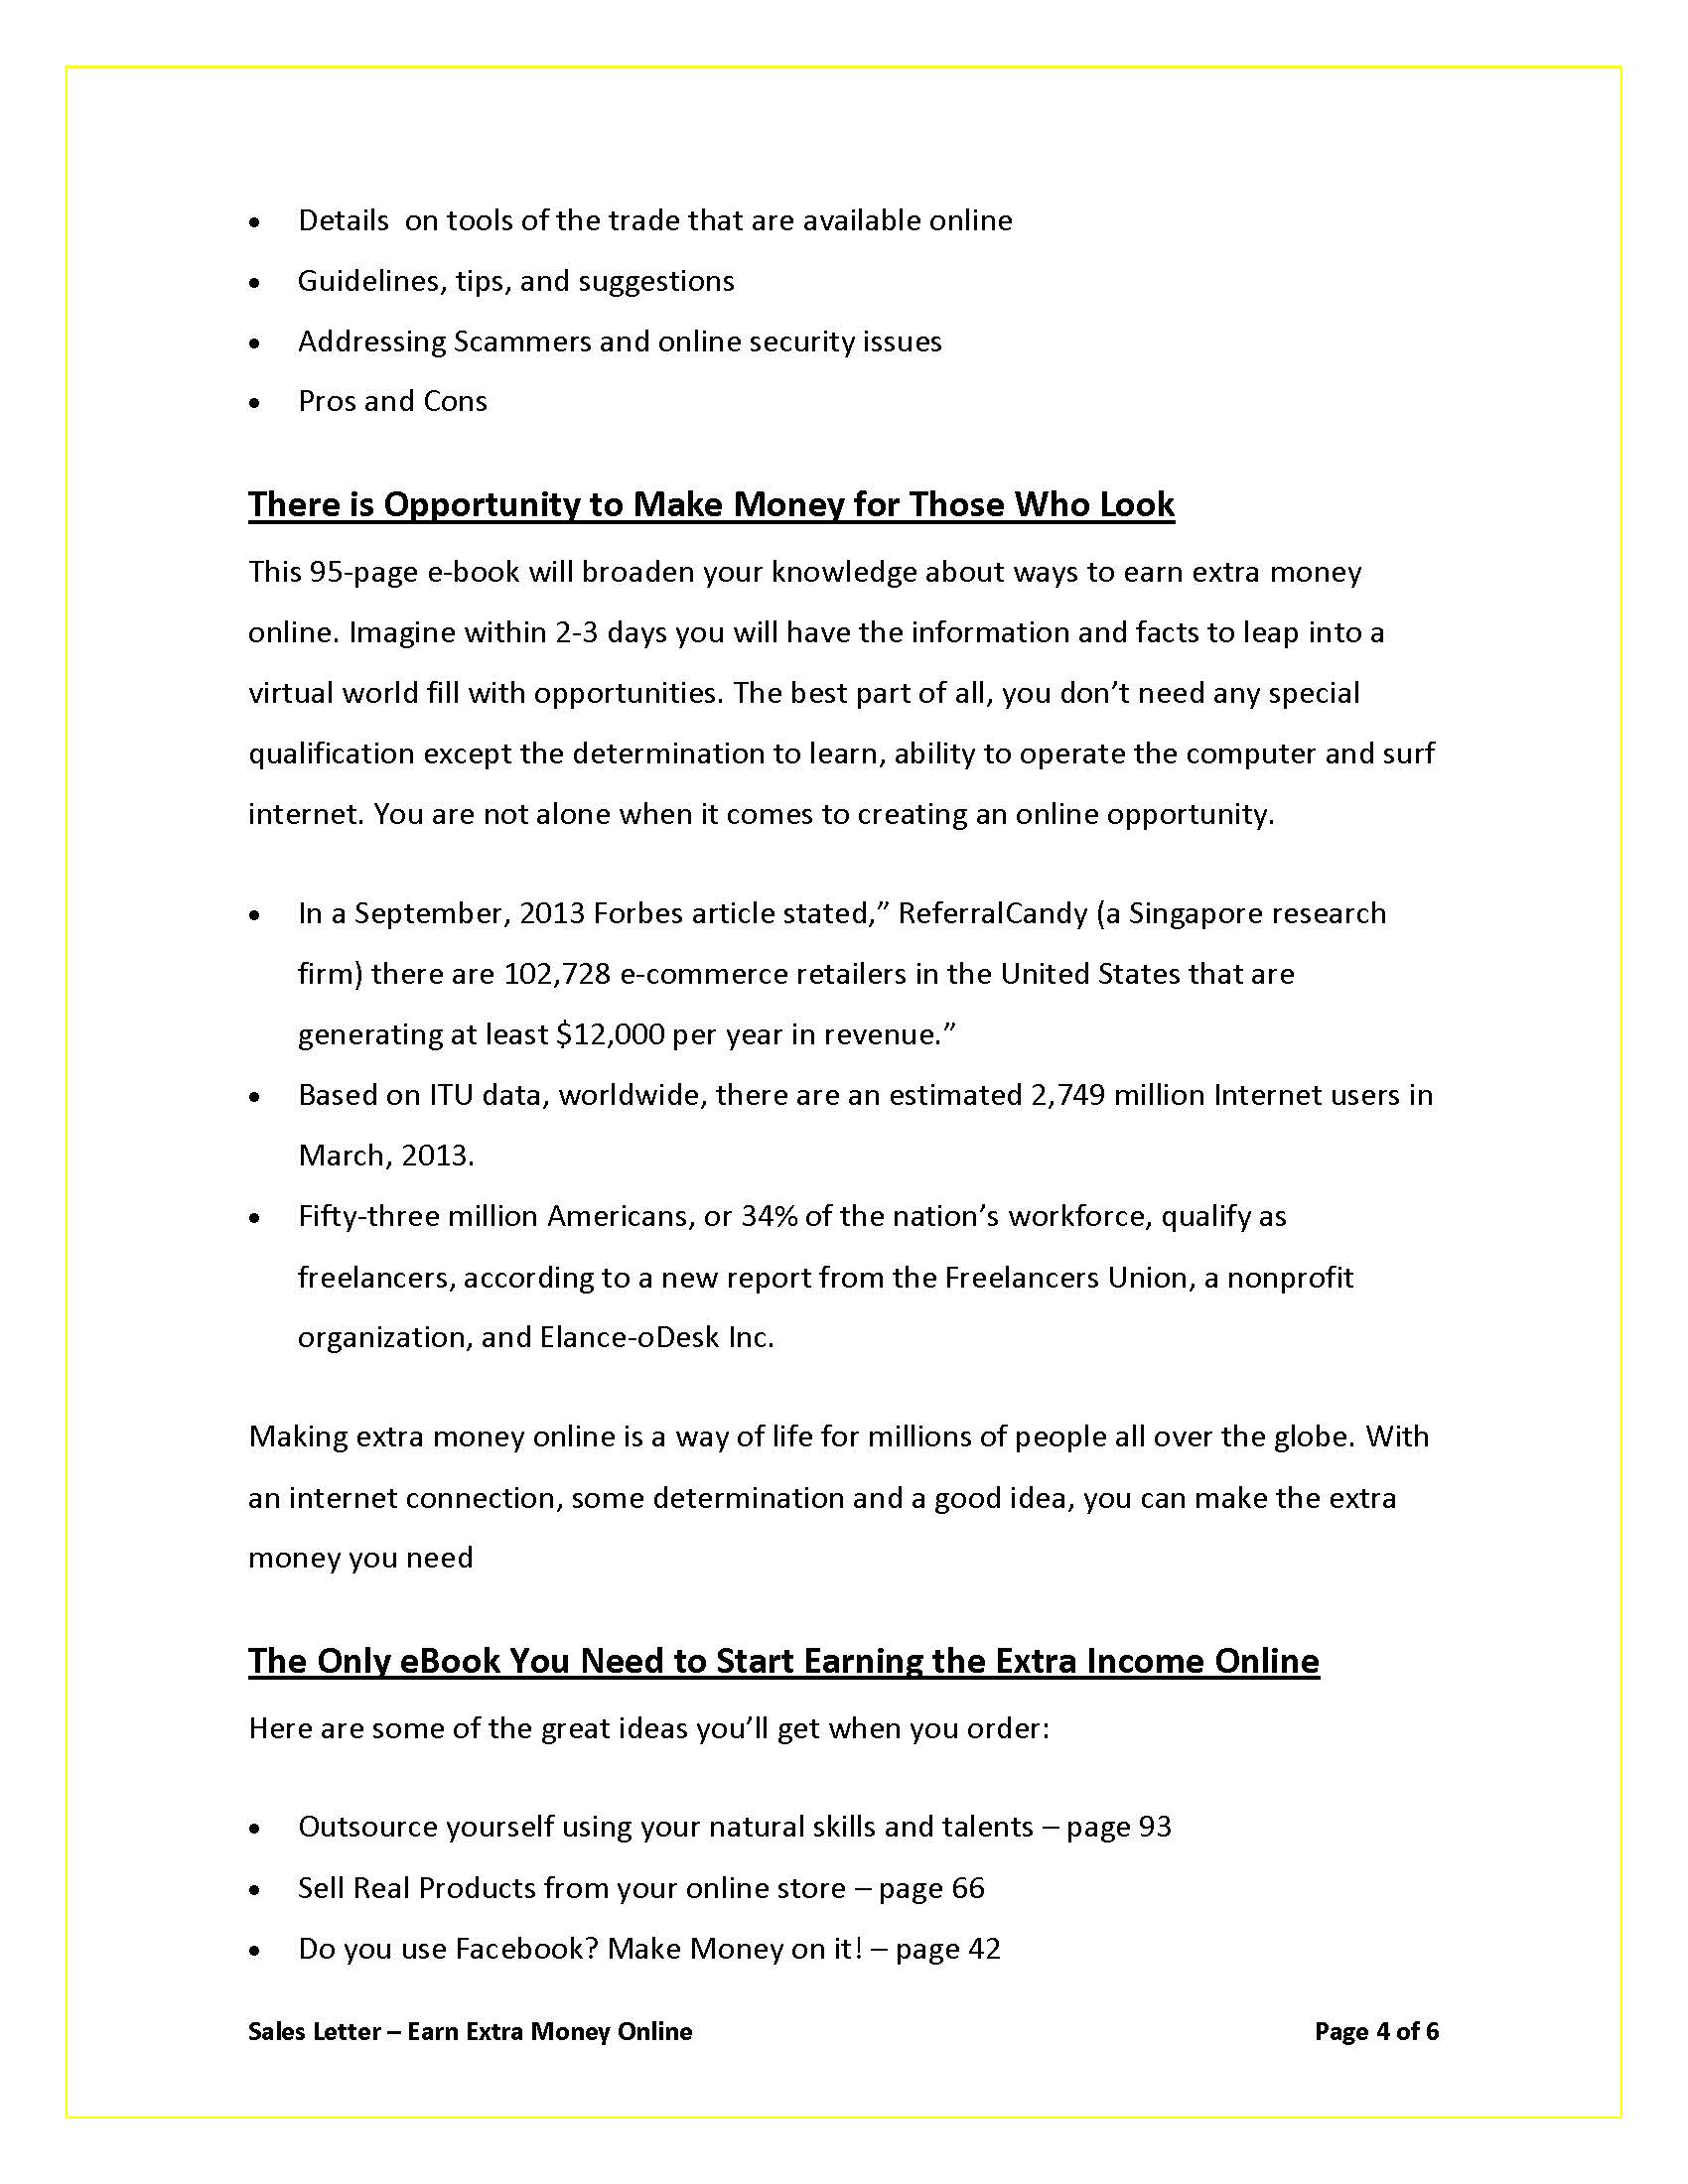 Sales Letter - How To Earn Money Online_Page_4